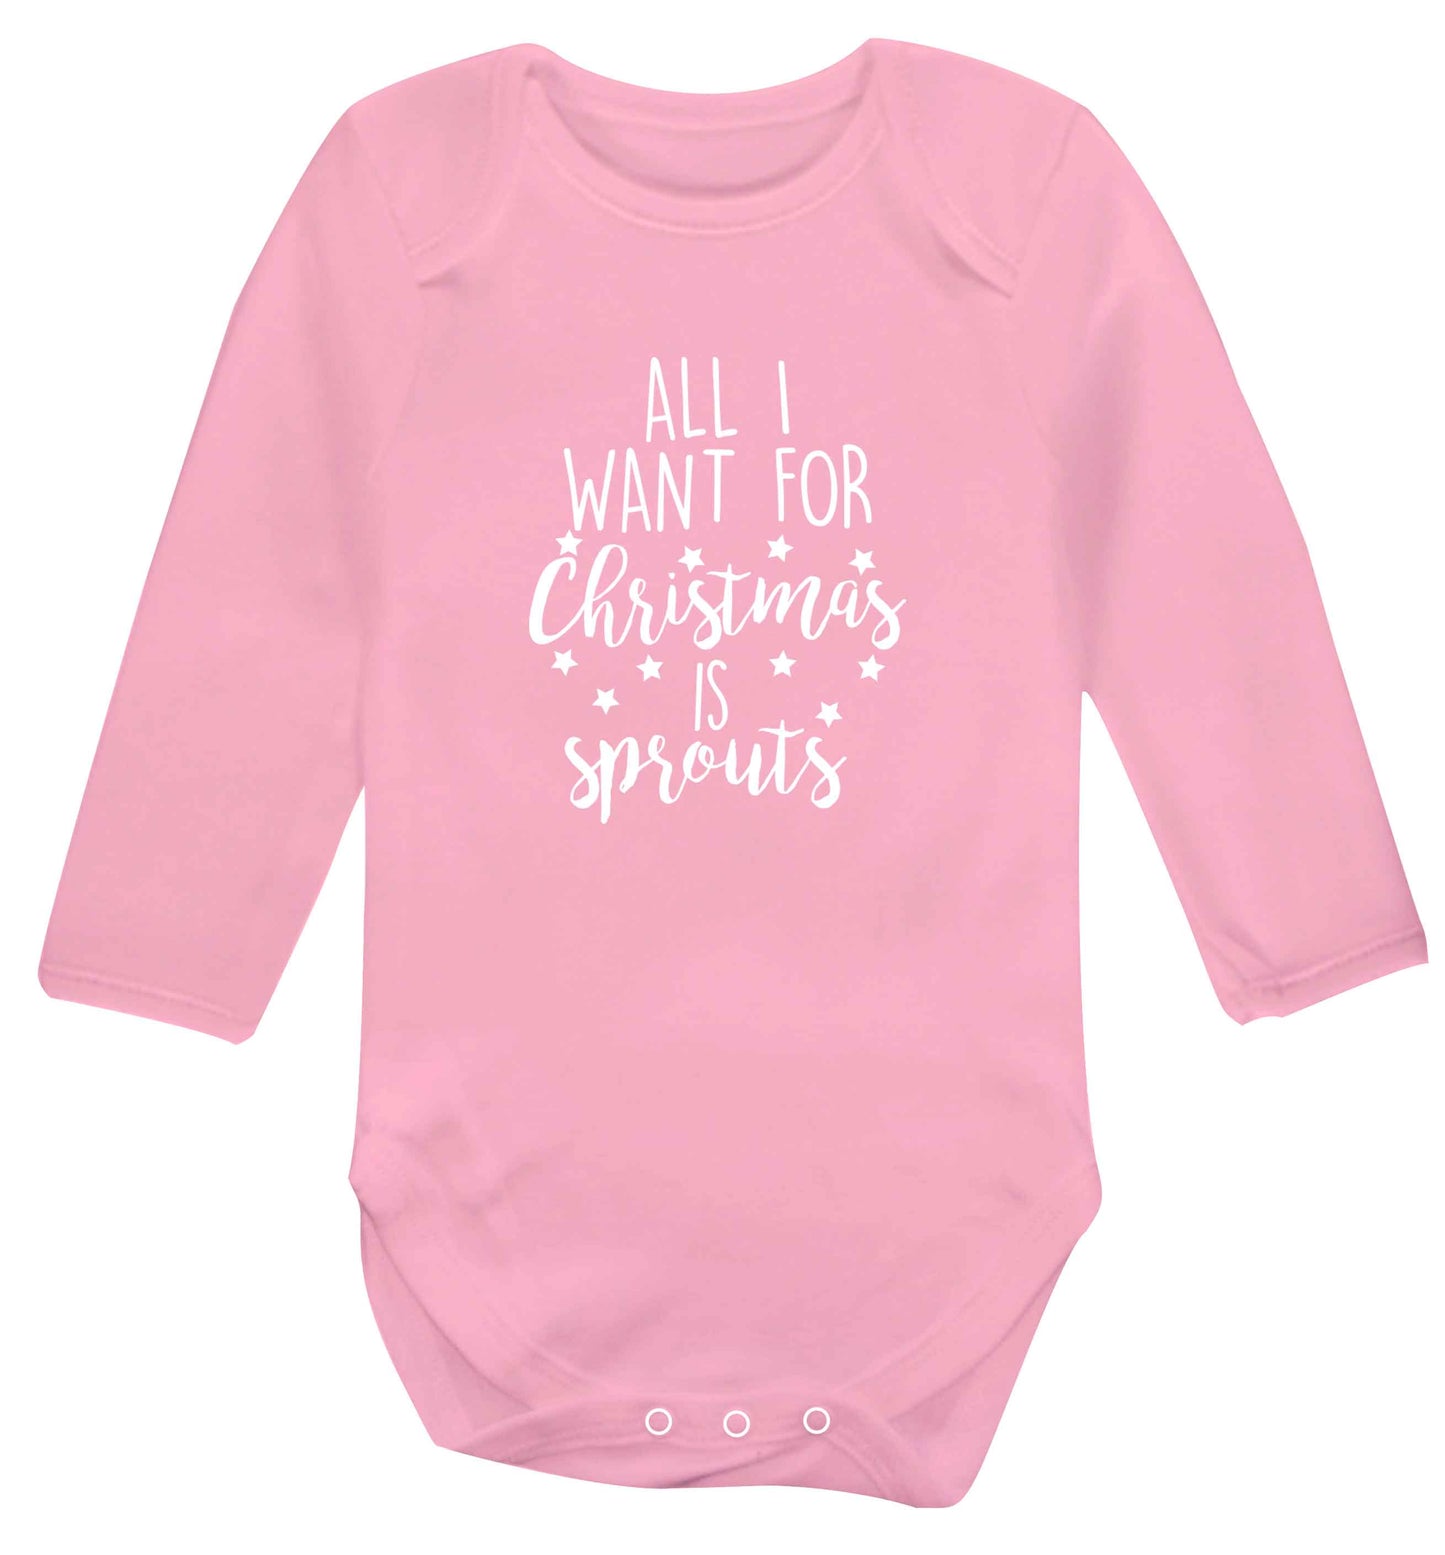 All I want for Christmas is sprouts baby vest long sleeved pale pink 6-12 months